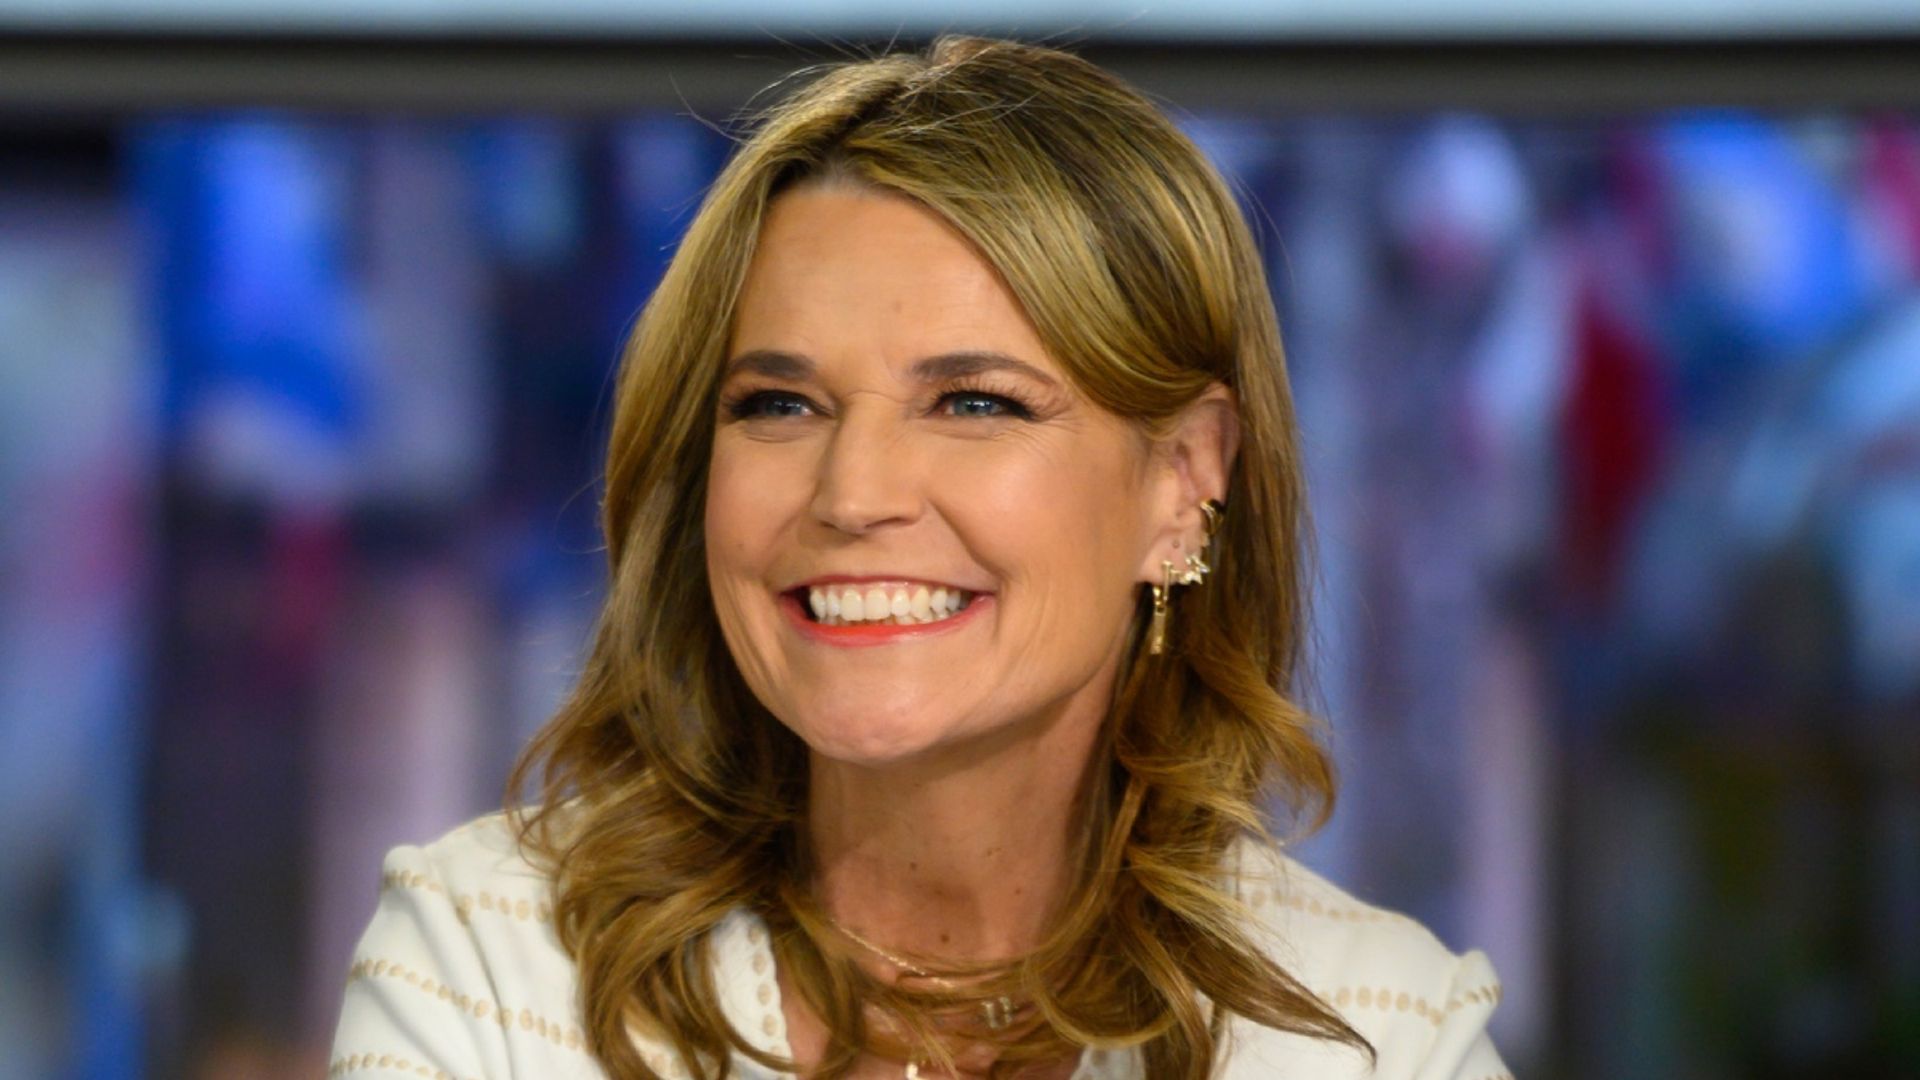 Today's Savannah Guthrie gets fans talking with 'hot date' p...